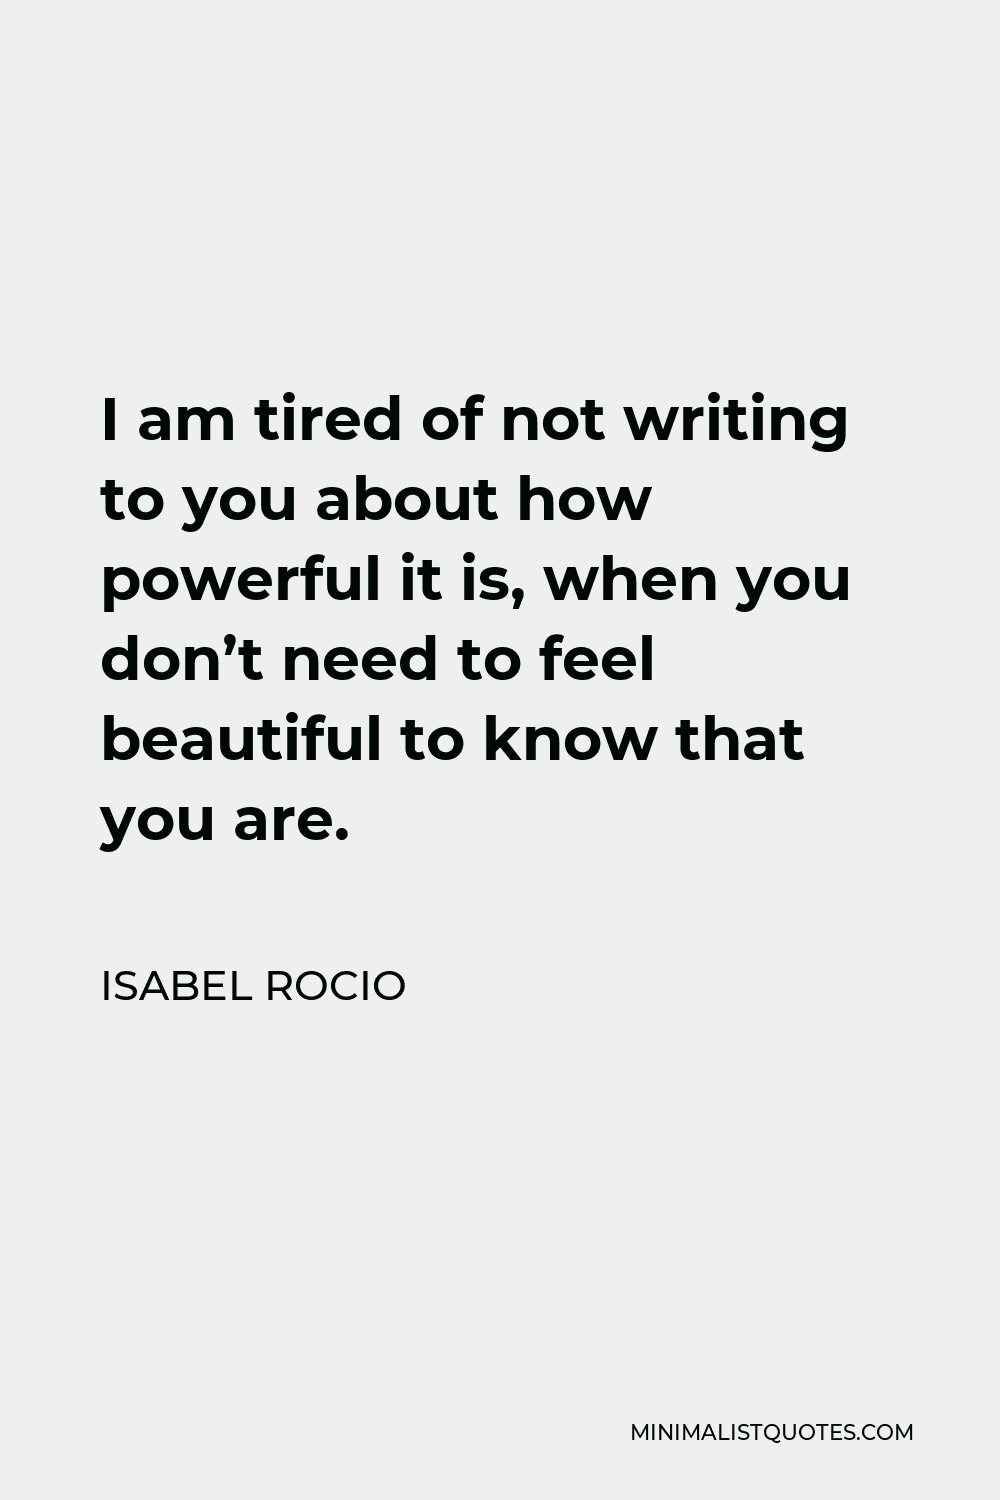 Isabel Rocio Quote - I am tired of not writing to you about how powerful it is, when you don’t need to feel beautiful to know that you are.